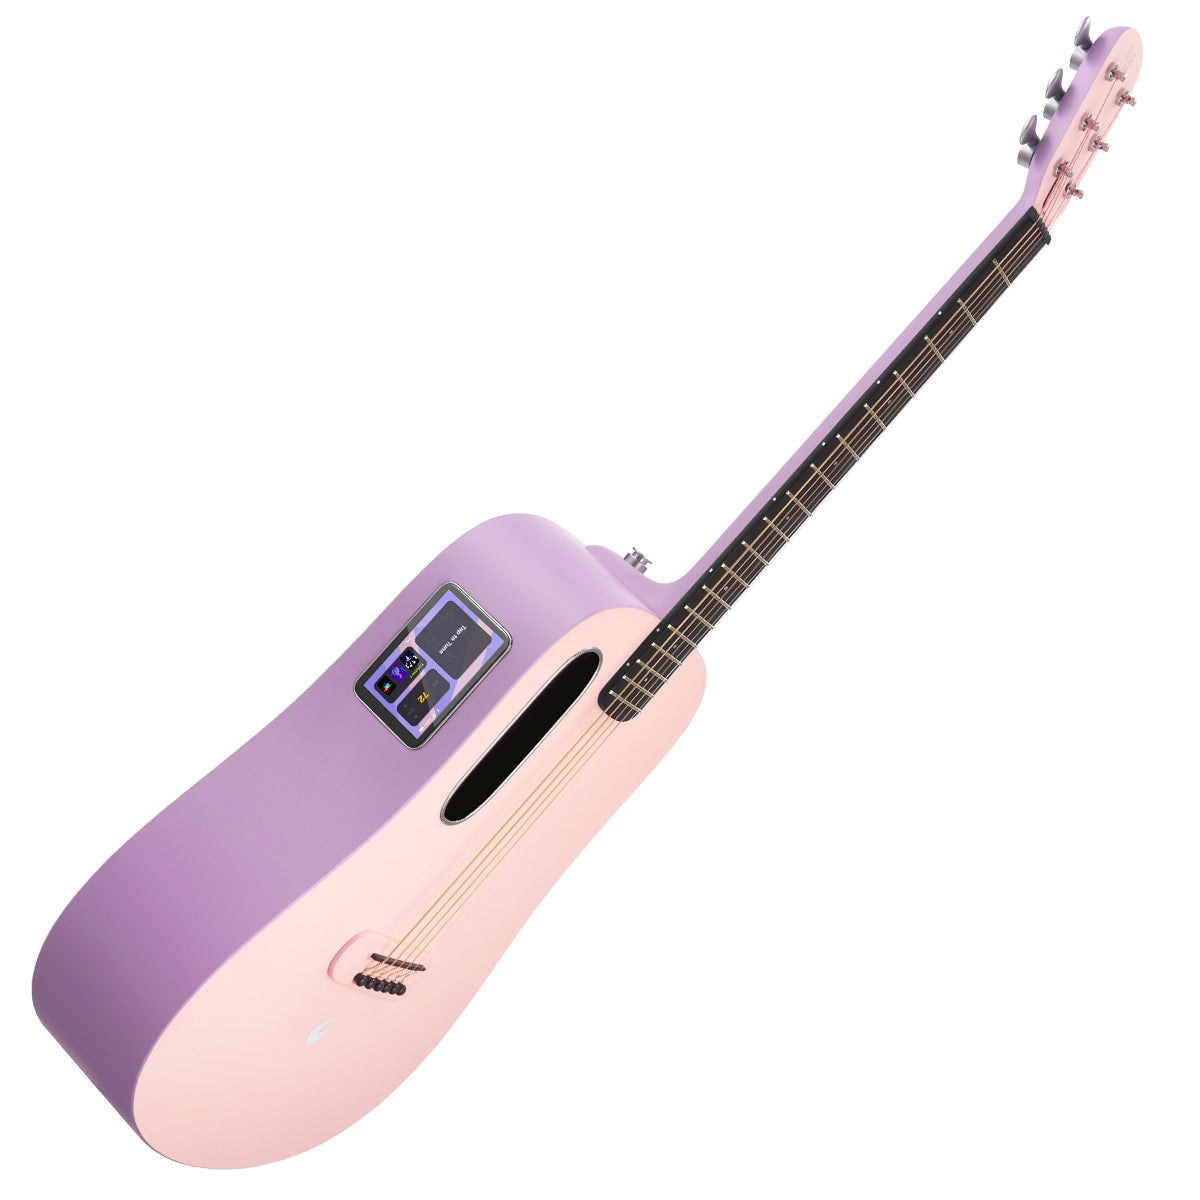 BLUE LAVA TOUCH with Airflow Bag ~ Coral Pink / Lavender, Acoustic Guitar for sale at Richards Guitars.